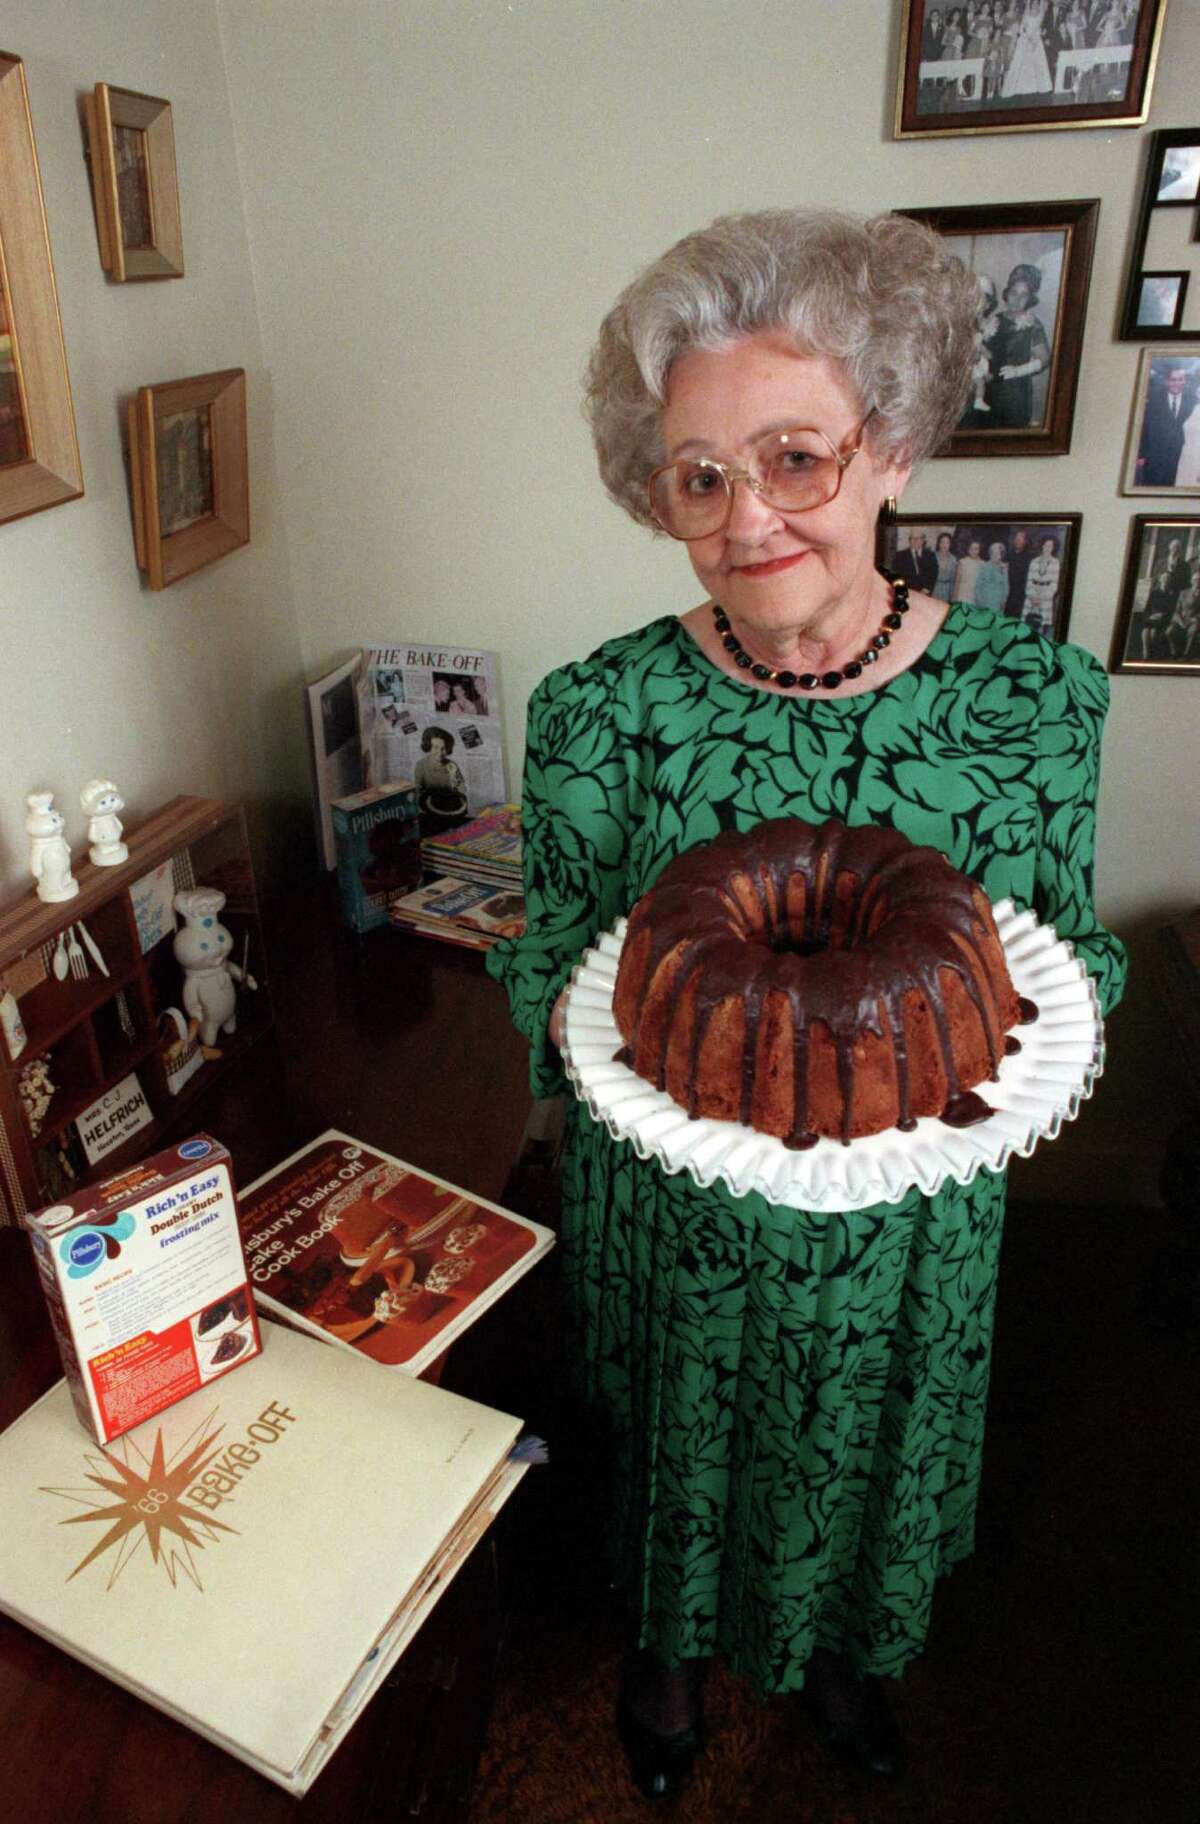 Ella Rita Helfrich and her Tunnel Of Fudge Cake which was a winner in the Pillsbury Bake-Off in 1966. Photographed in 1990.